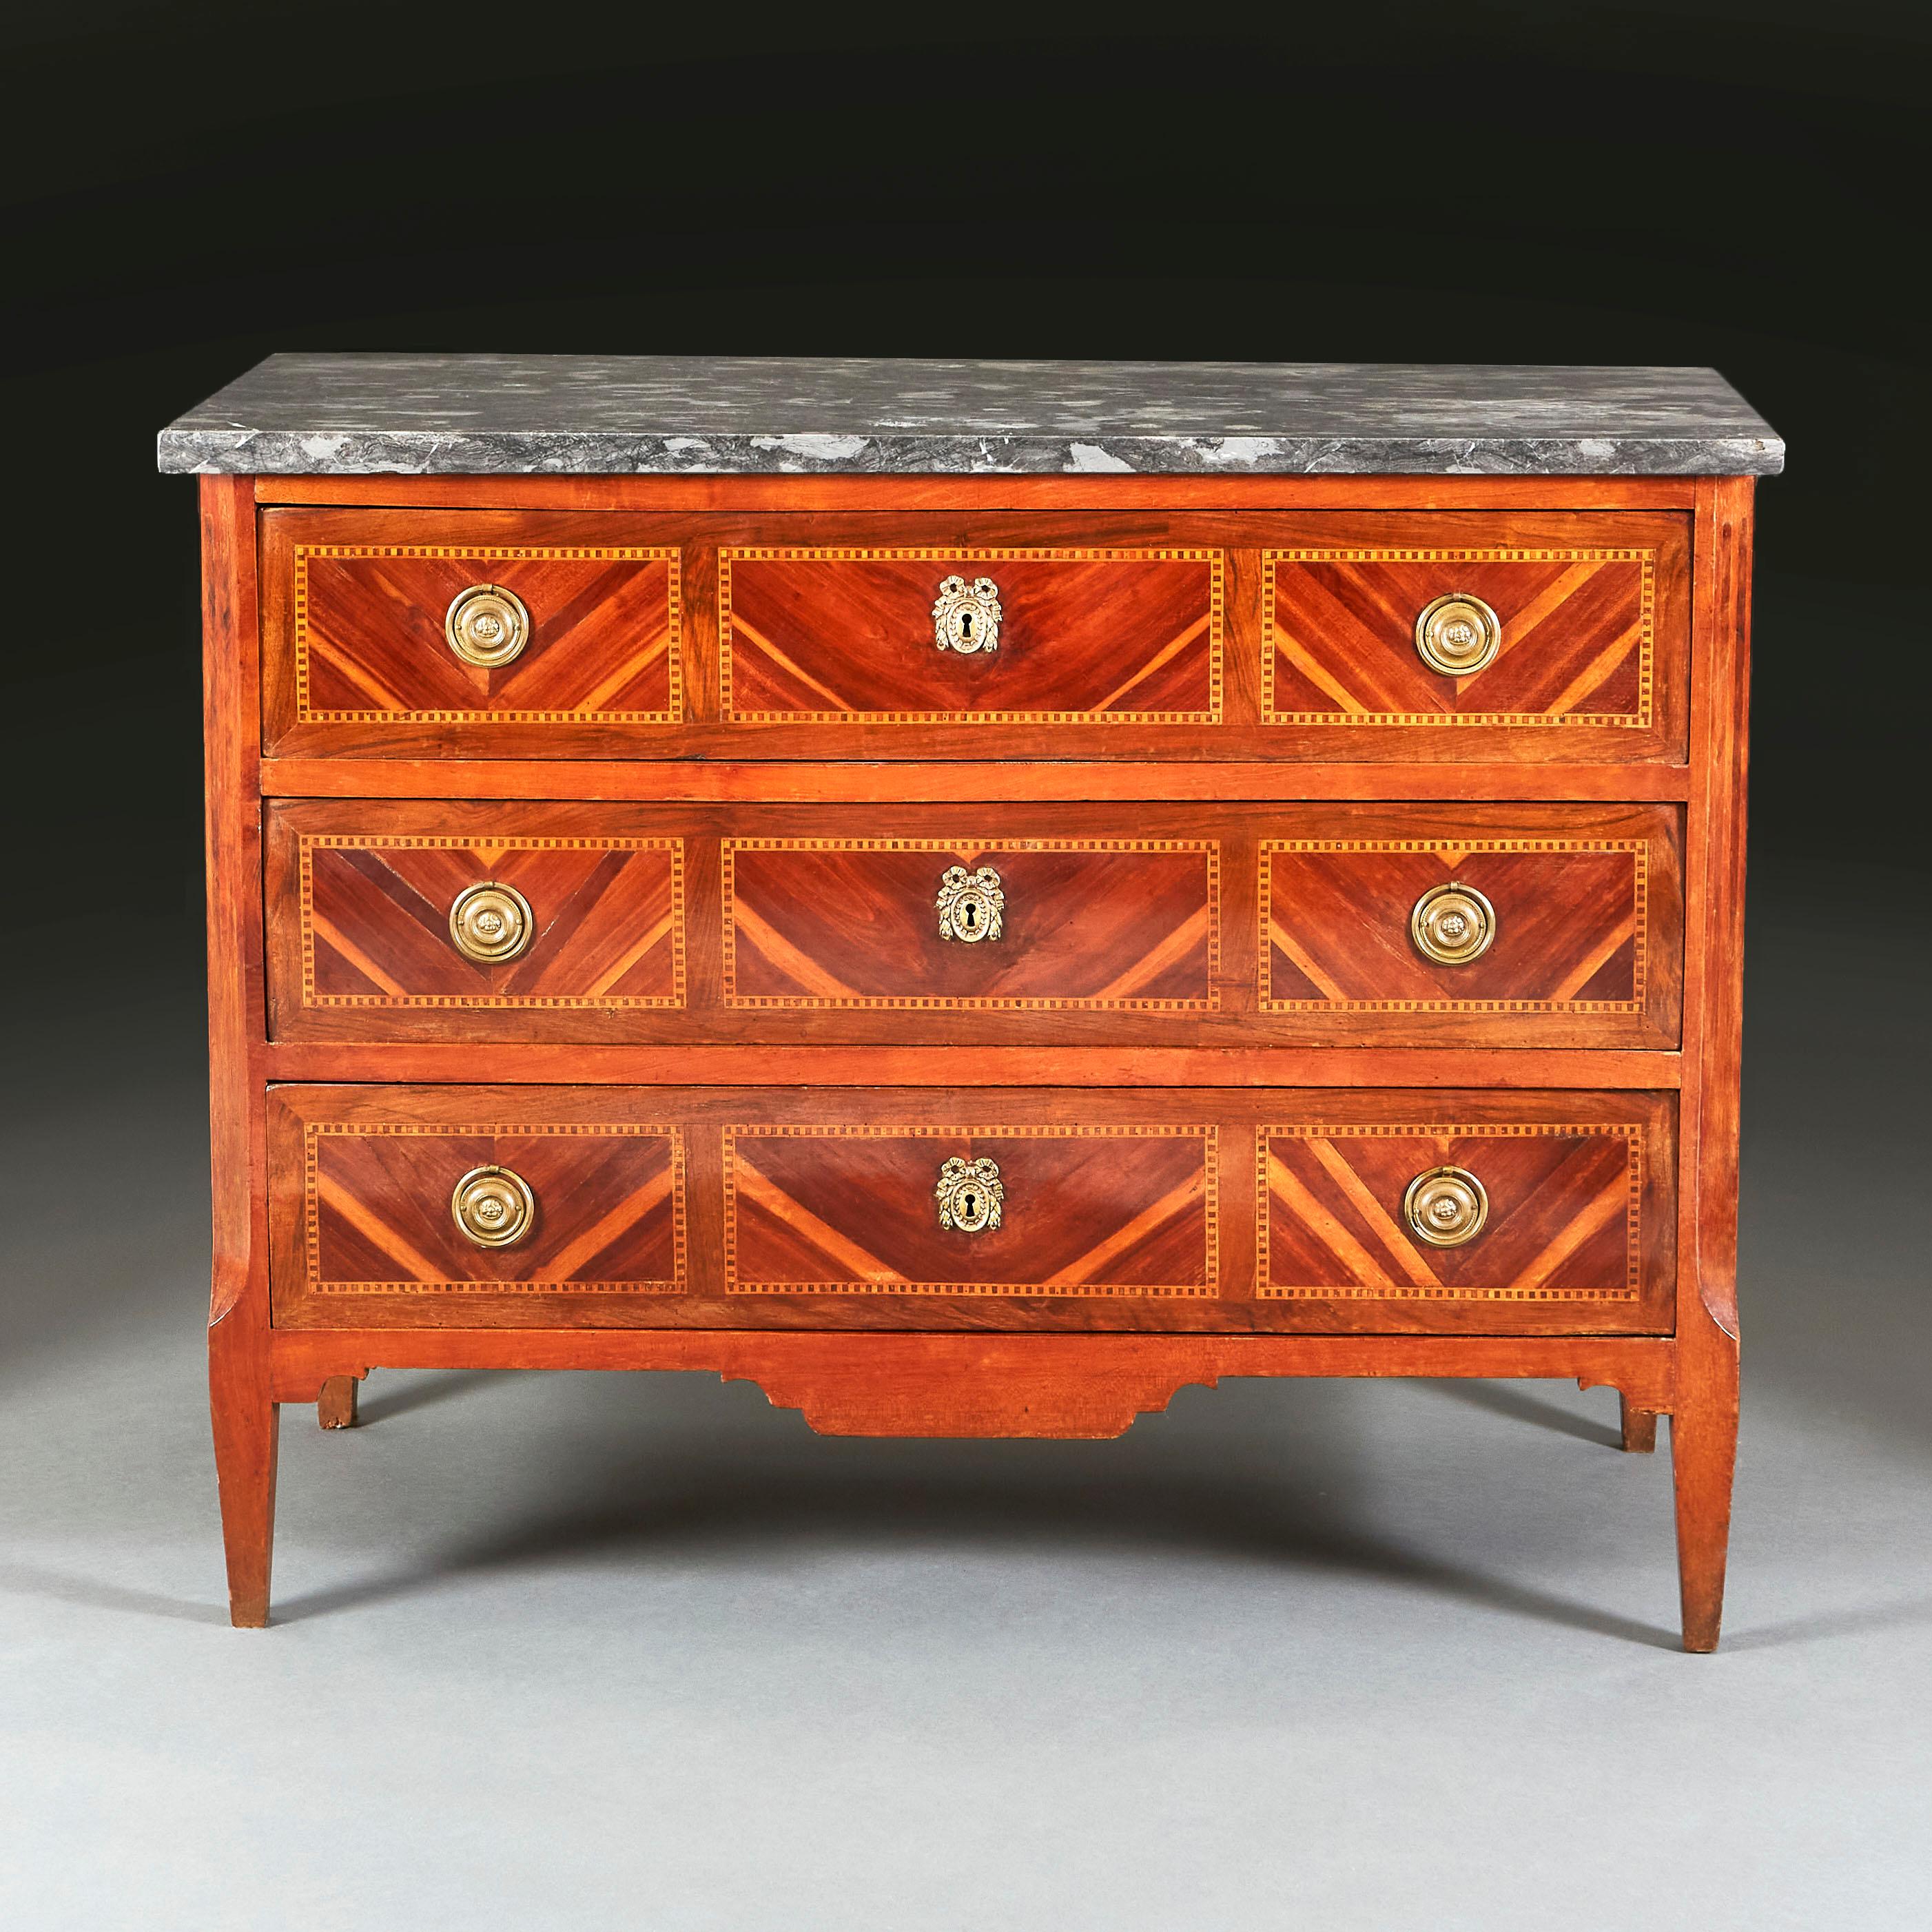 An early nineteenth century mahogany and kingwood parquetry commode, with grey marble top and with three drawers retaining the original handles and escutcheons, all supported on bracket feet.